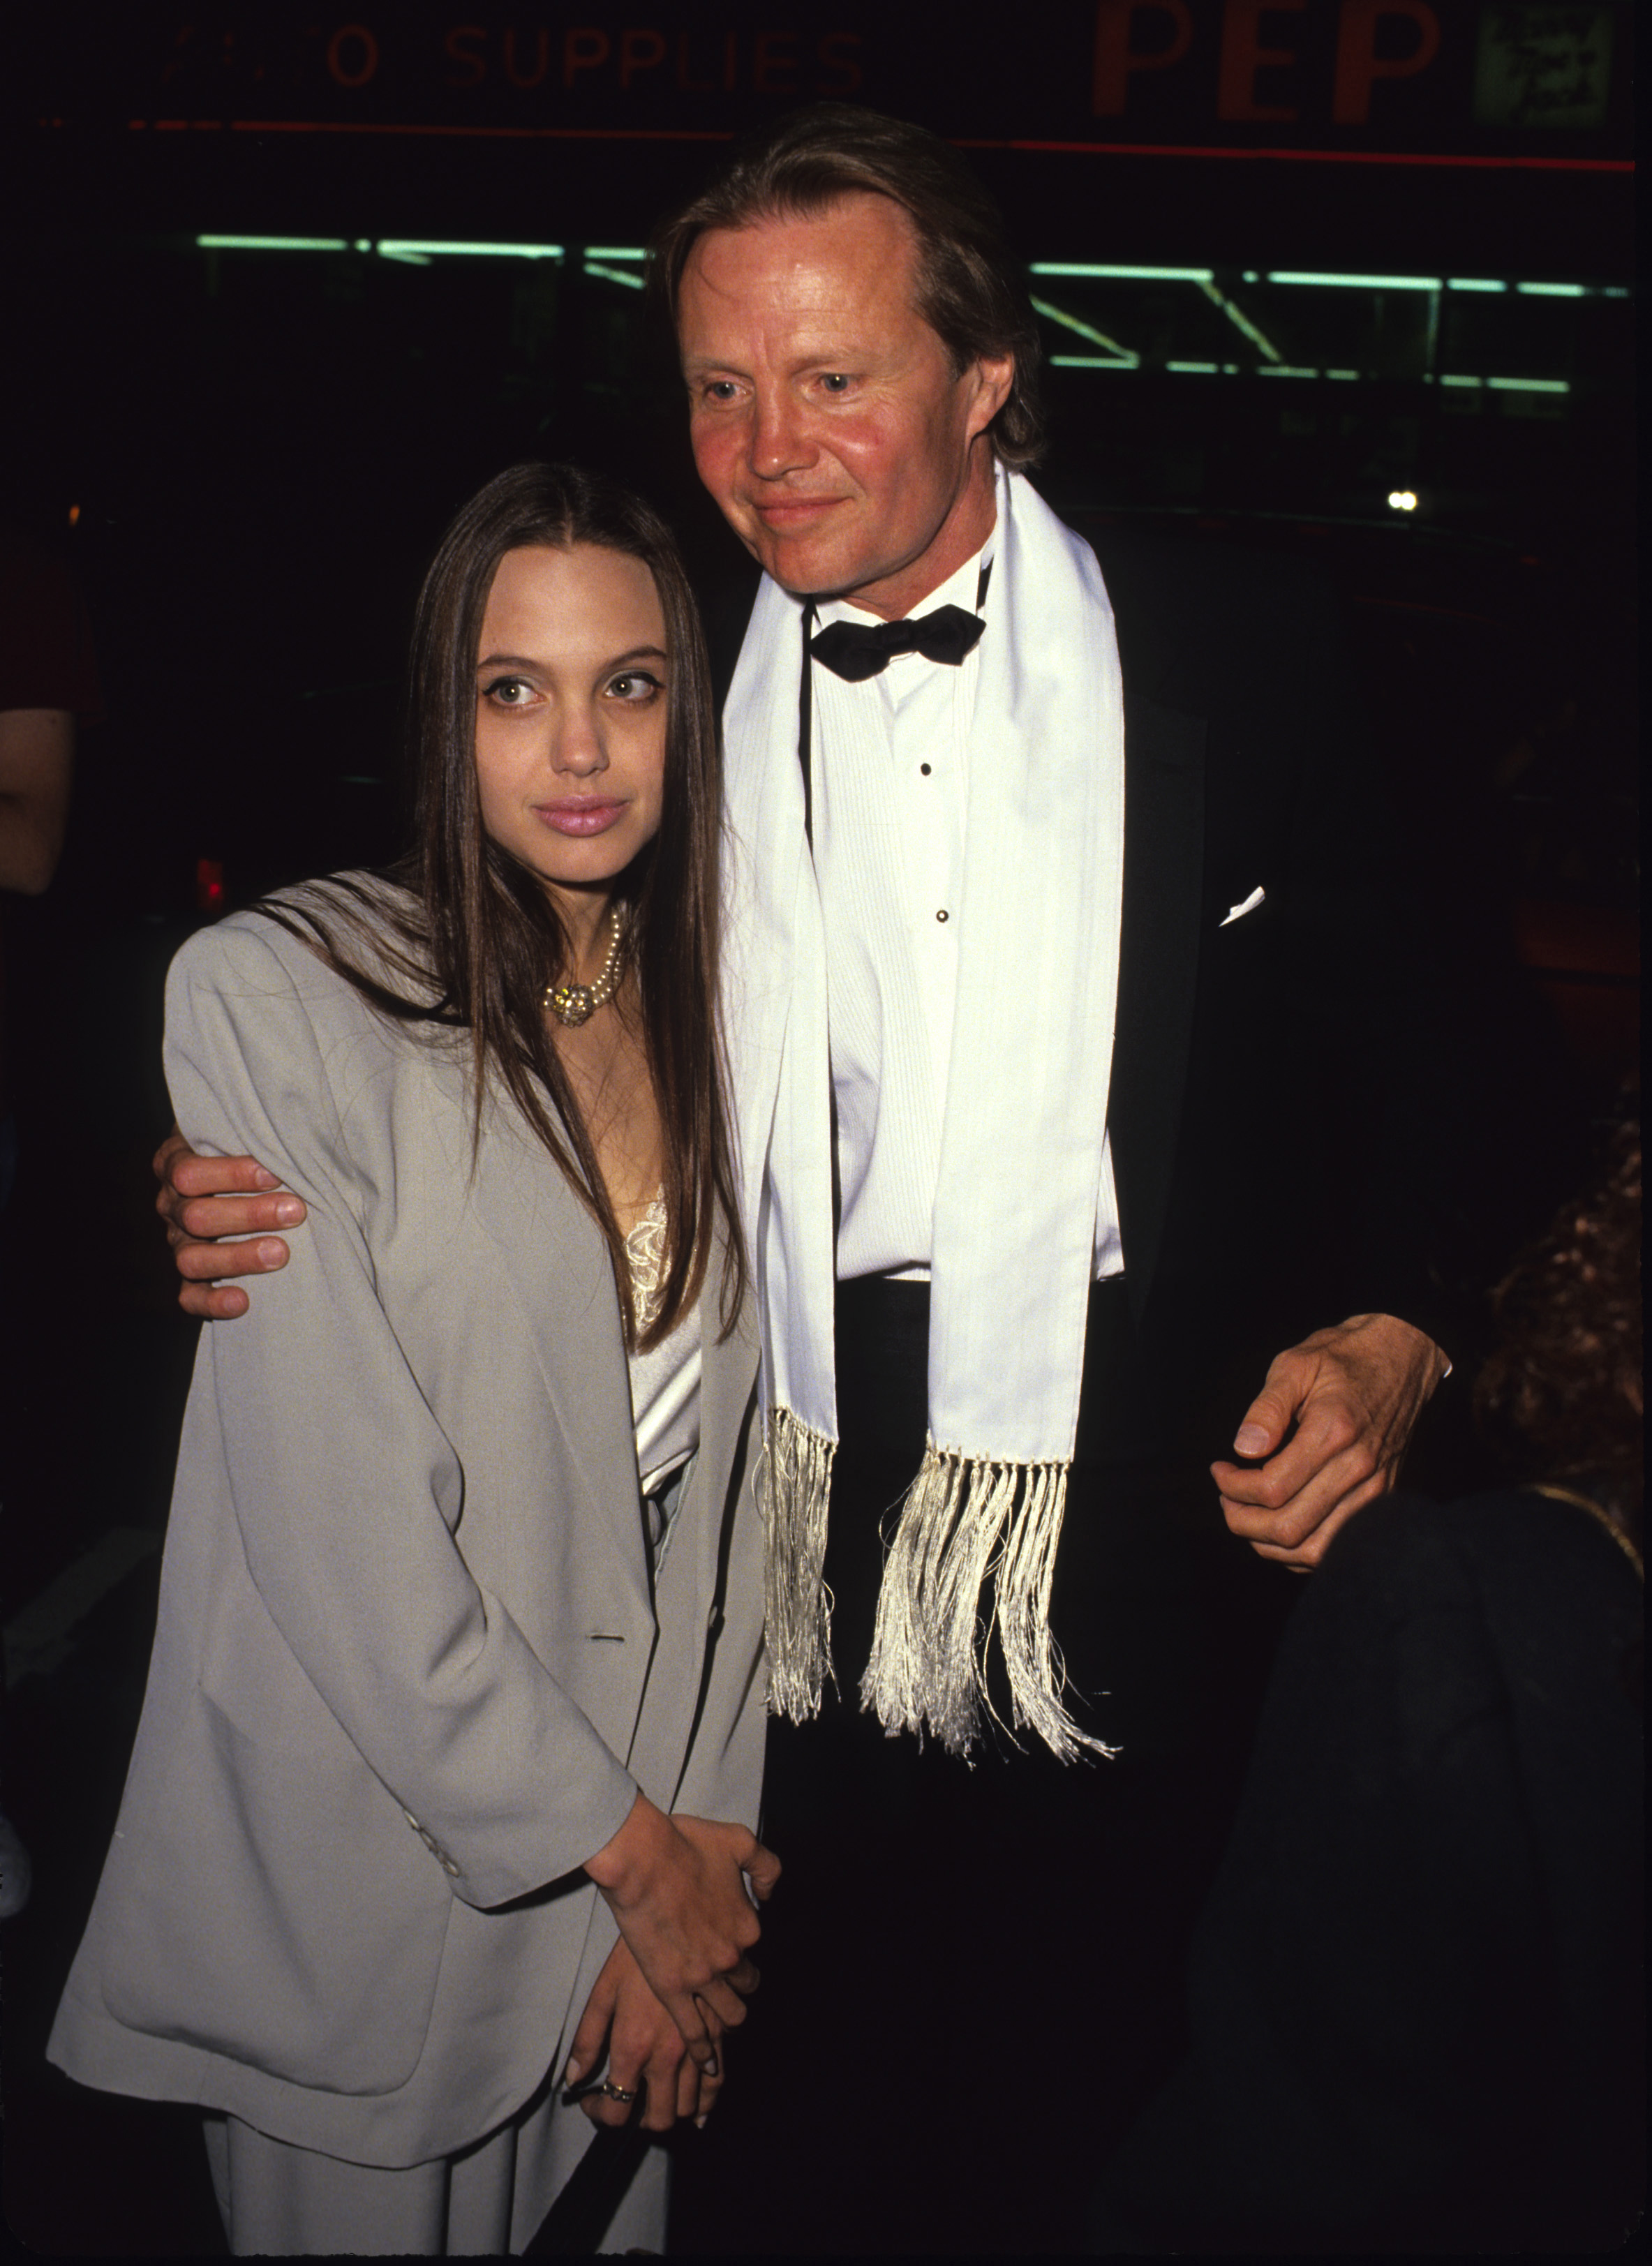 Angelina (seen here with Jon Voight) had her jawline taken down a couple of notches, said a plastic surgeon as her jaw over-projected